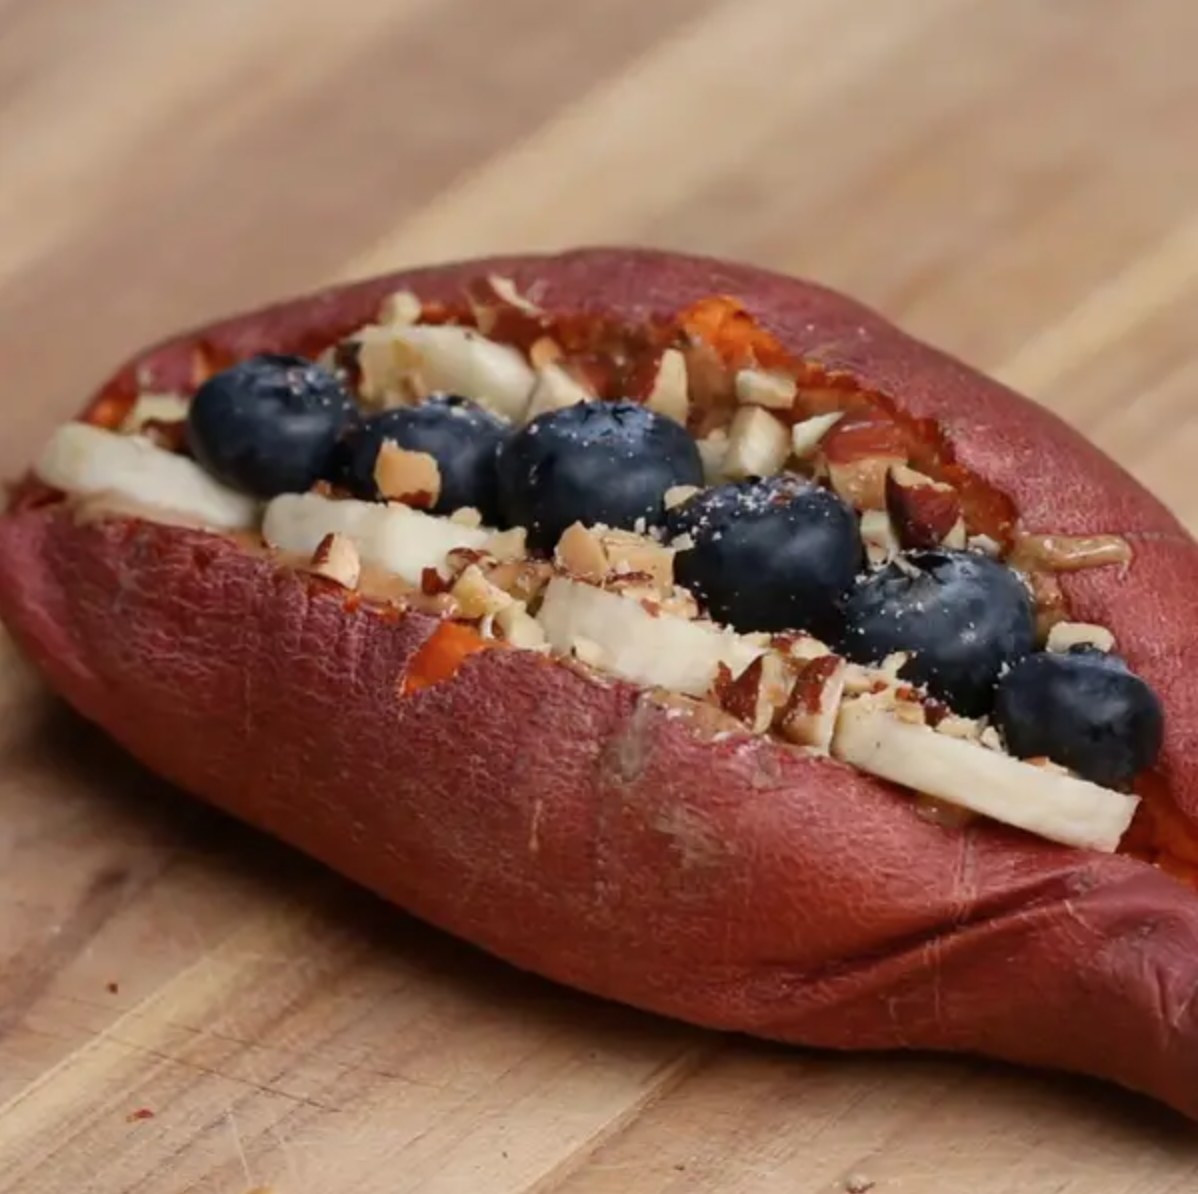 The sweet potato with blueberries, nuts, and bananas